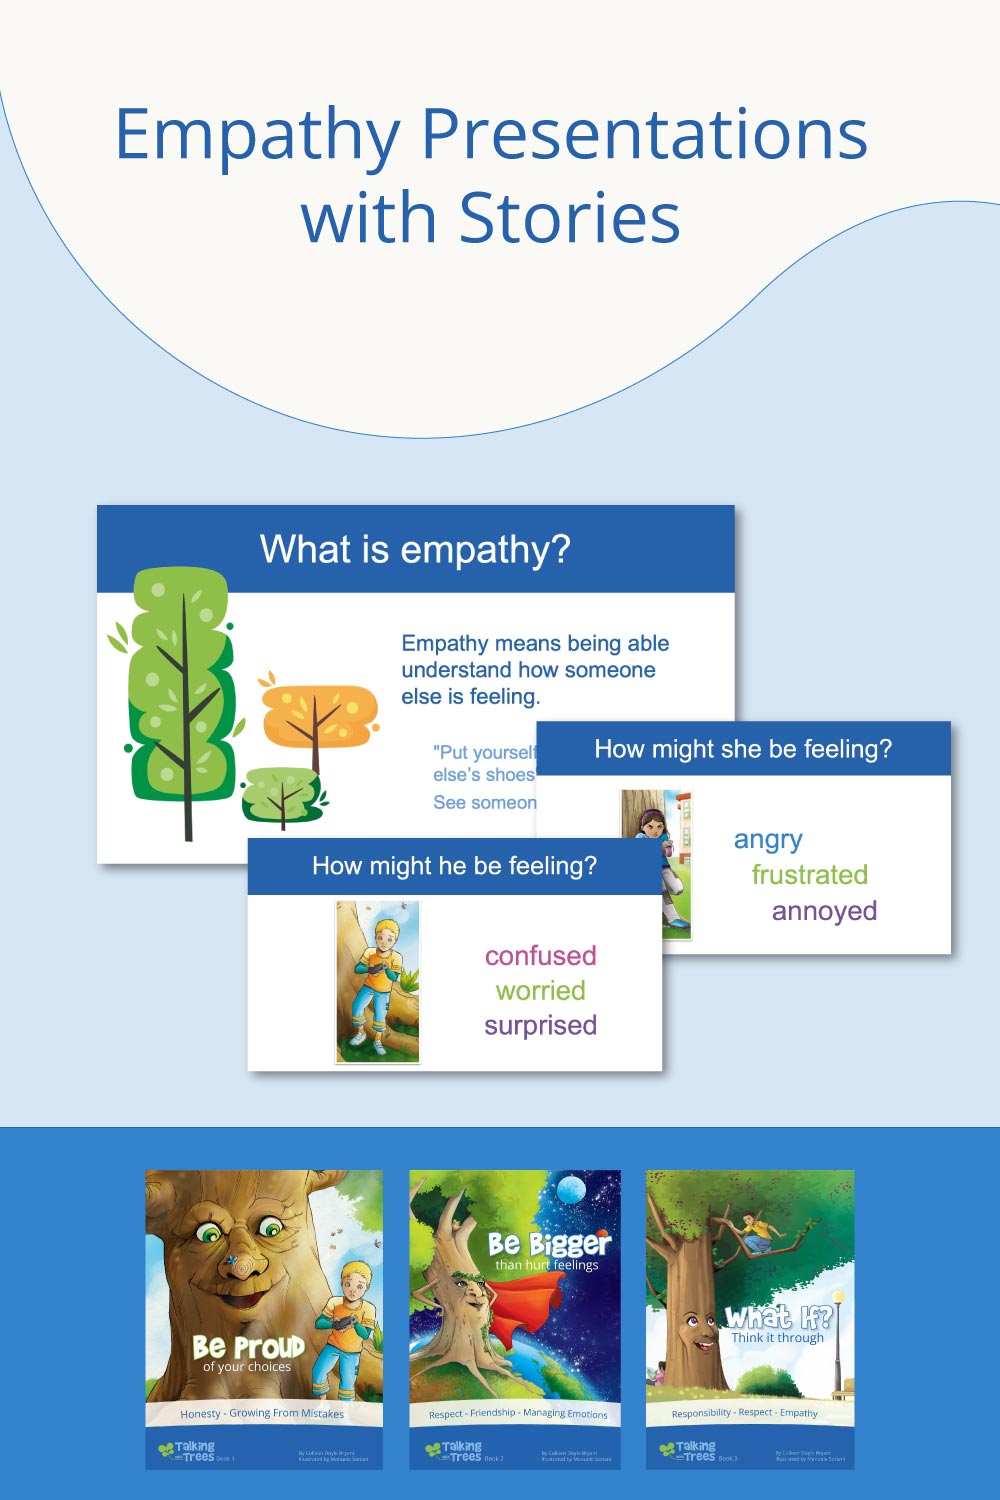 What is Empathy Presentations - Predicting emotions- Character Ed / SEL for kids